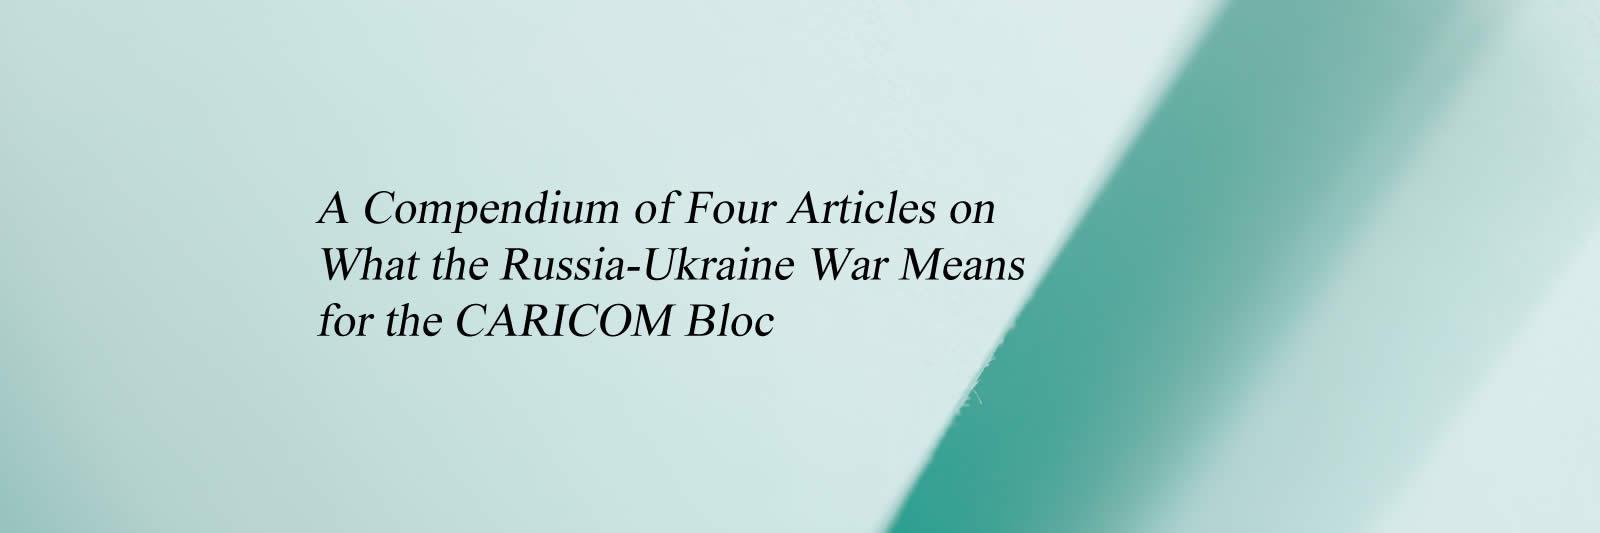 A Compendium of Four Articles on What the Russia-Ukraine War Means for the CARICOM Bloc